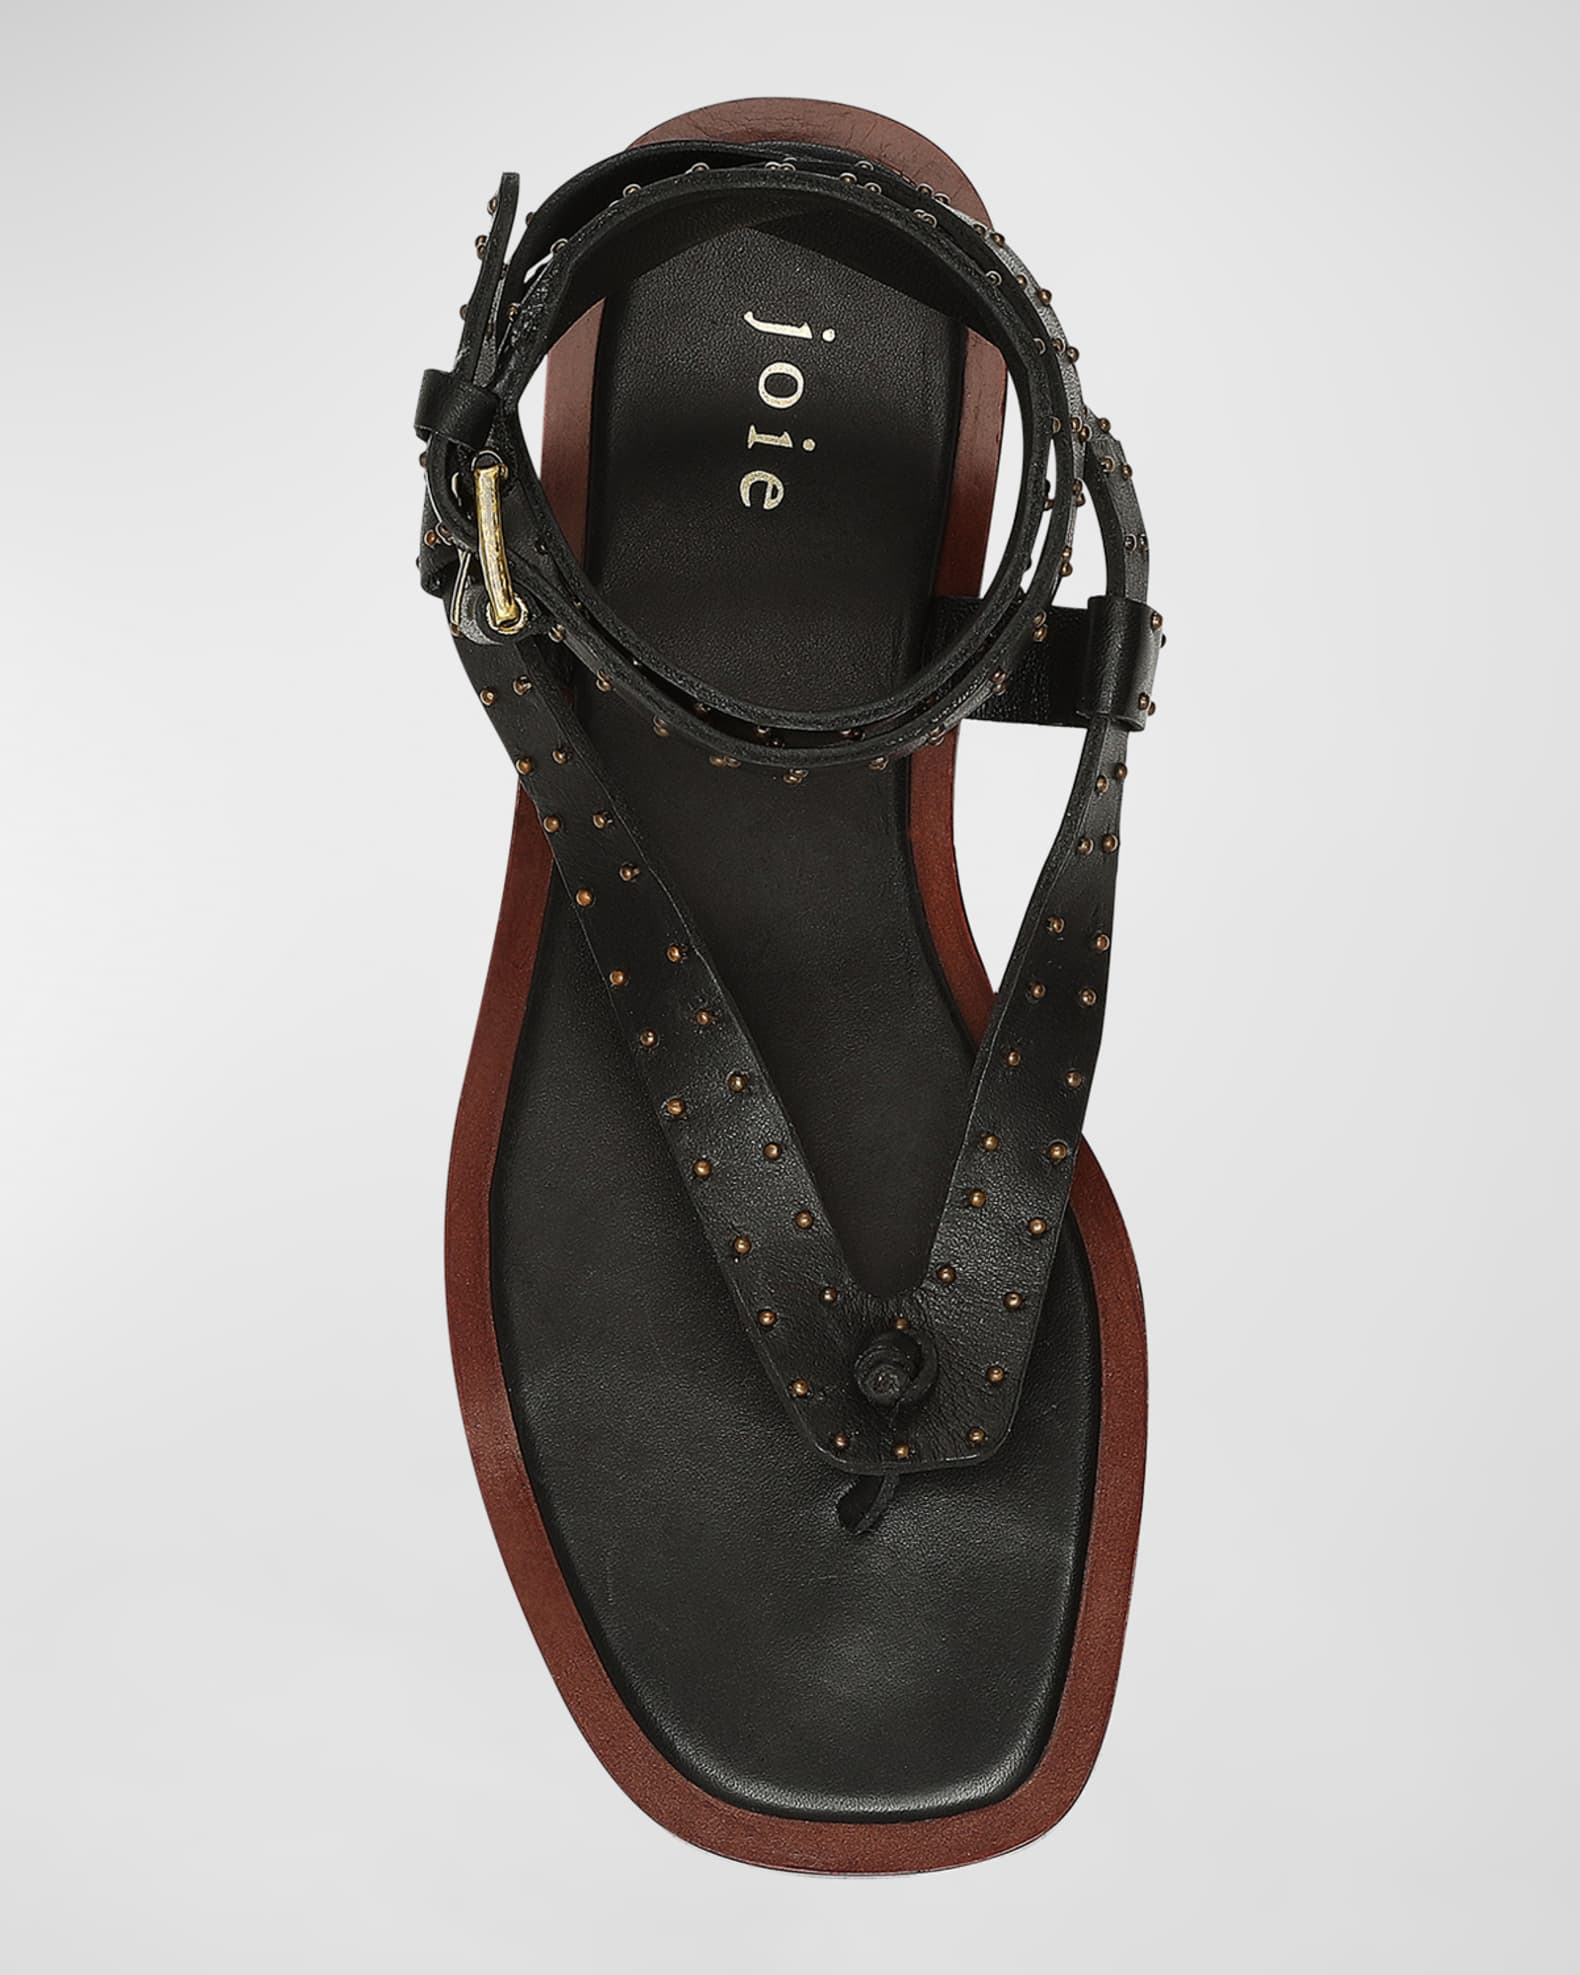 Joie Jennie Studded Ankle-Strap Thong Sandals | Neiman Marcus